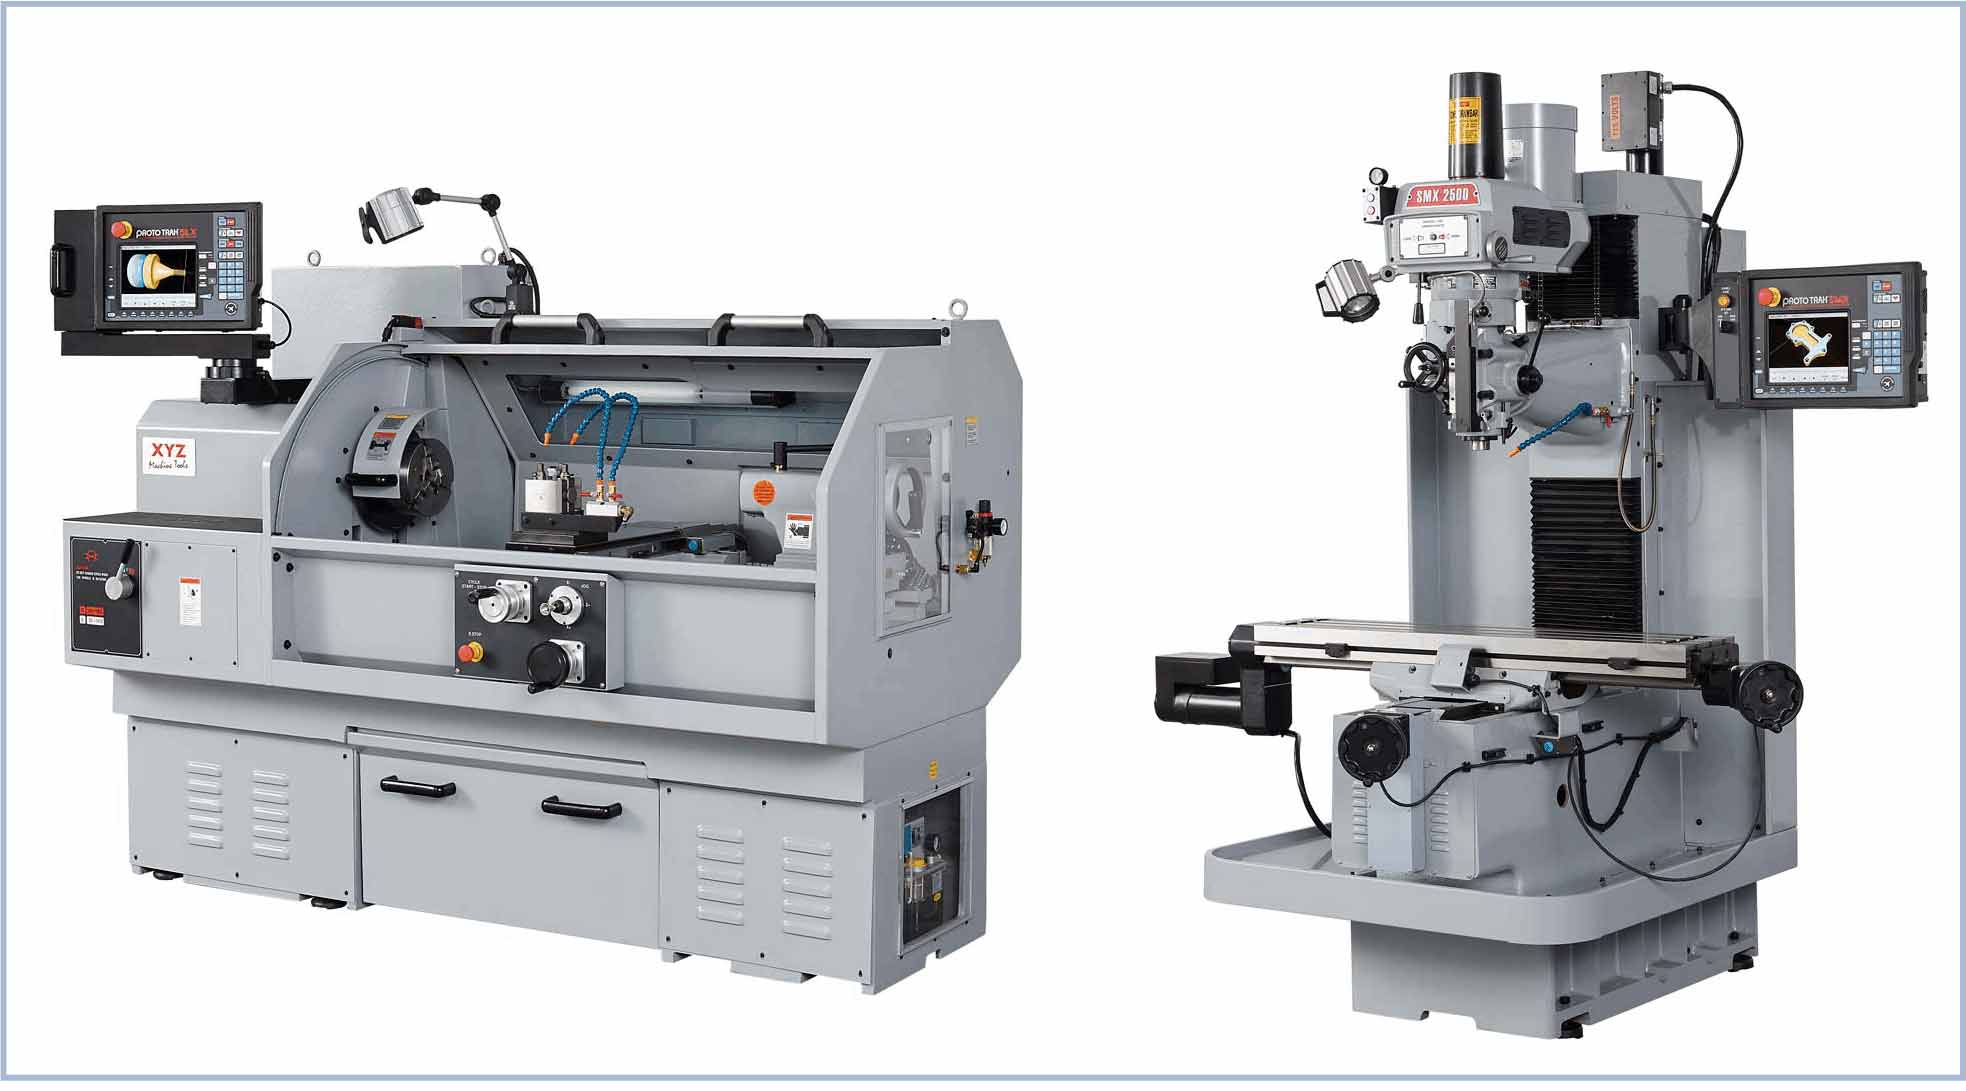 lcm-systems-invest-ps40000-xyz-cnc-mill-lathe-expand-internal-machining-facility